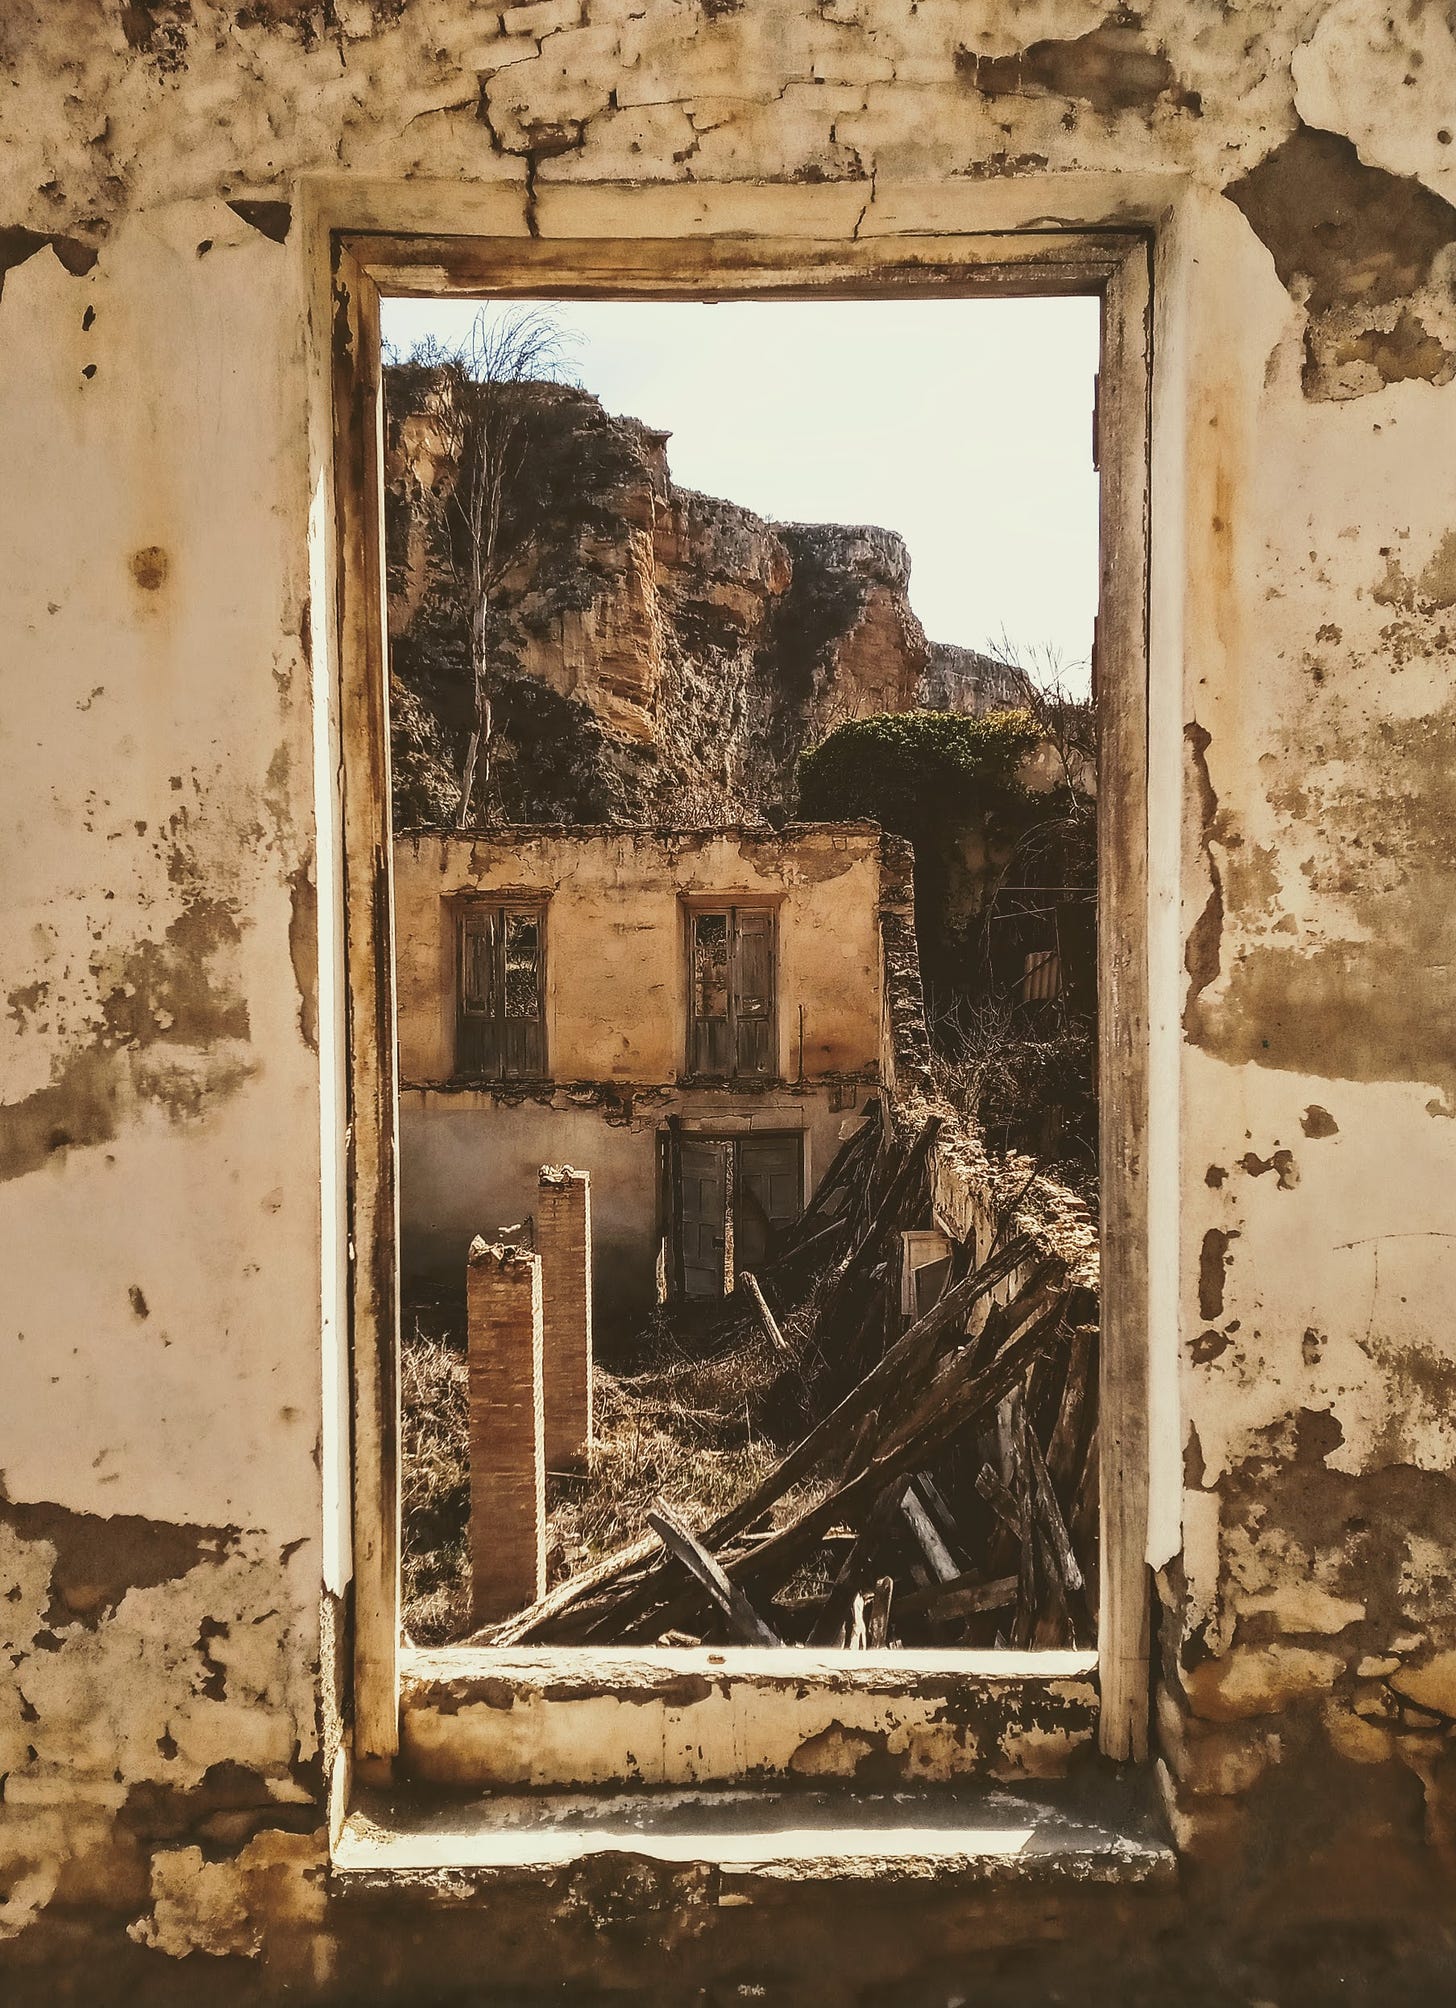 Ruins of old mill house at Alhama de Granada, steep cliffs of river gorge in background, viewed through the door of the mill house ruins. 